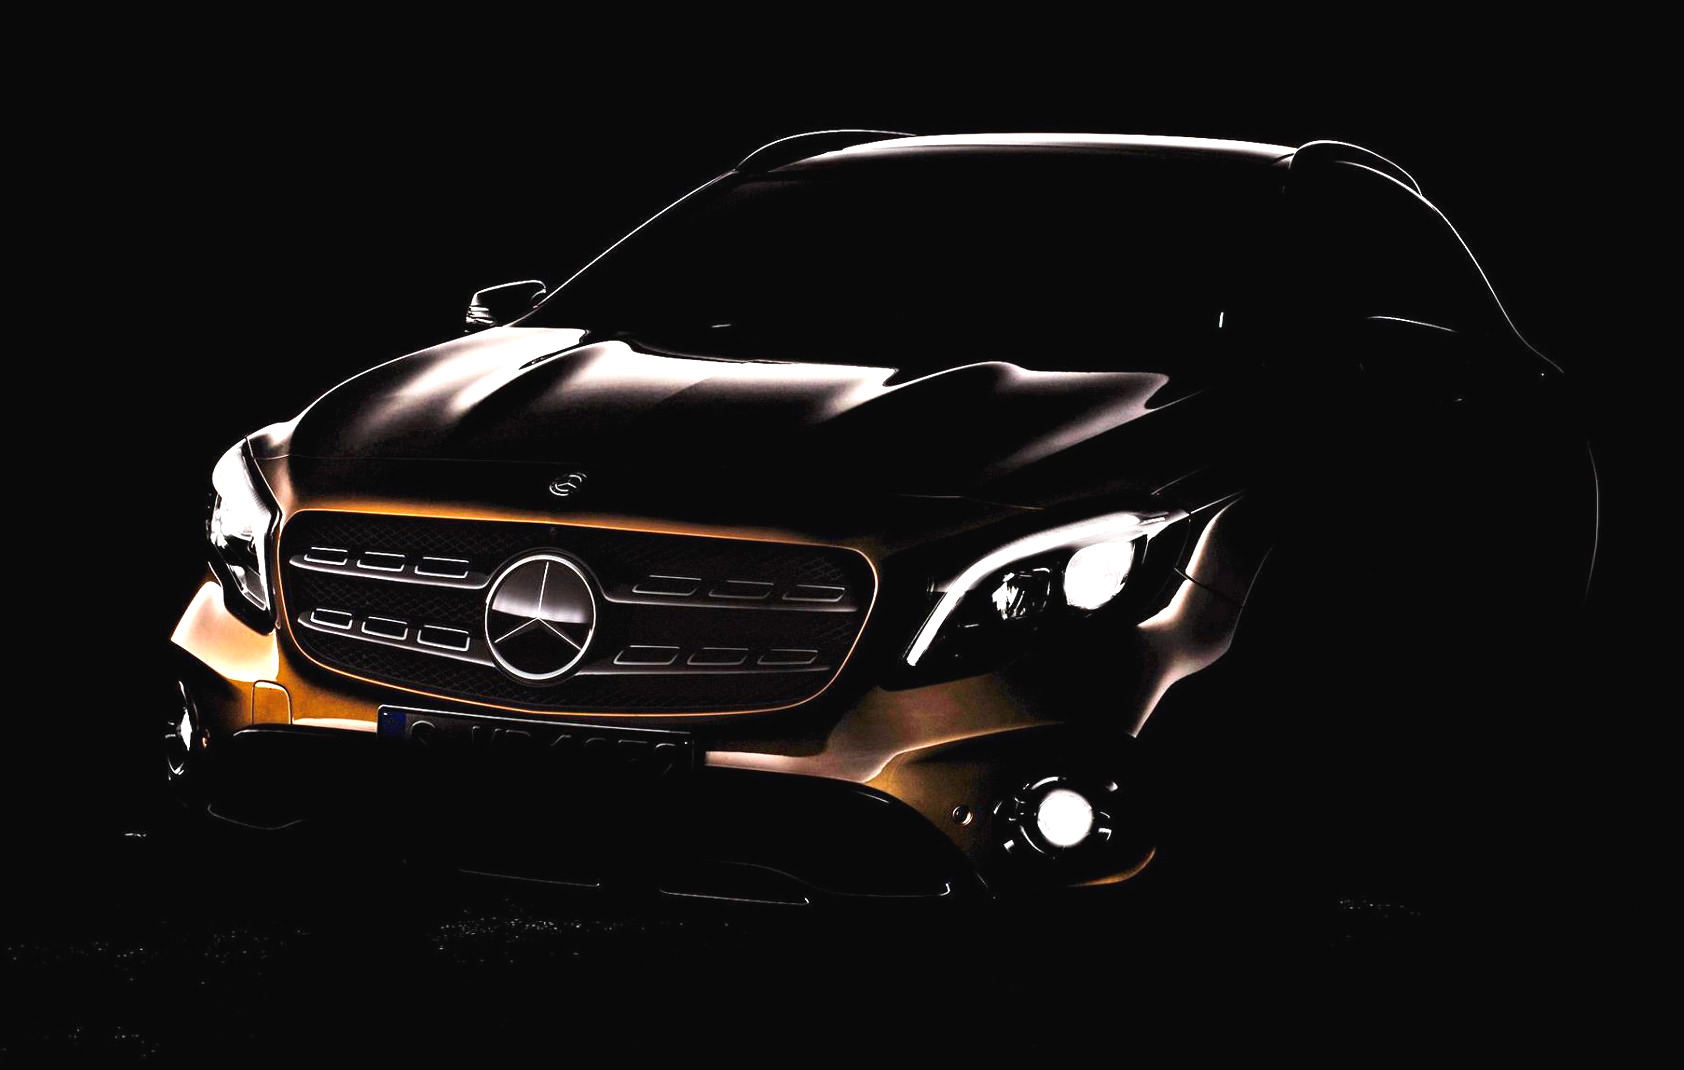 Mercedes-Benz will unveil the facelifted 2017 GLA small SUV later this ...